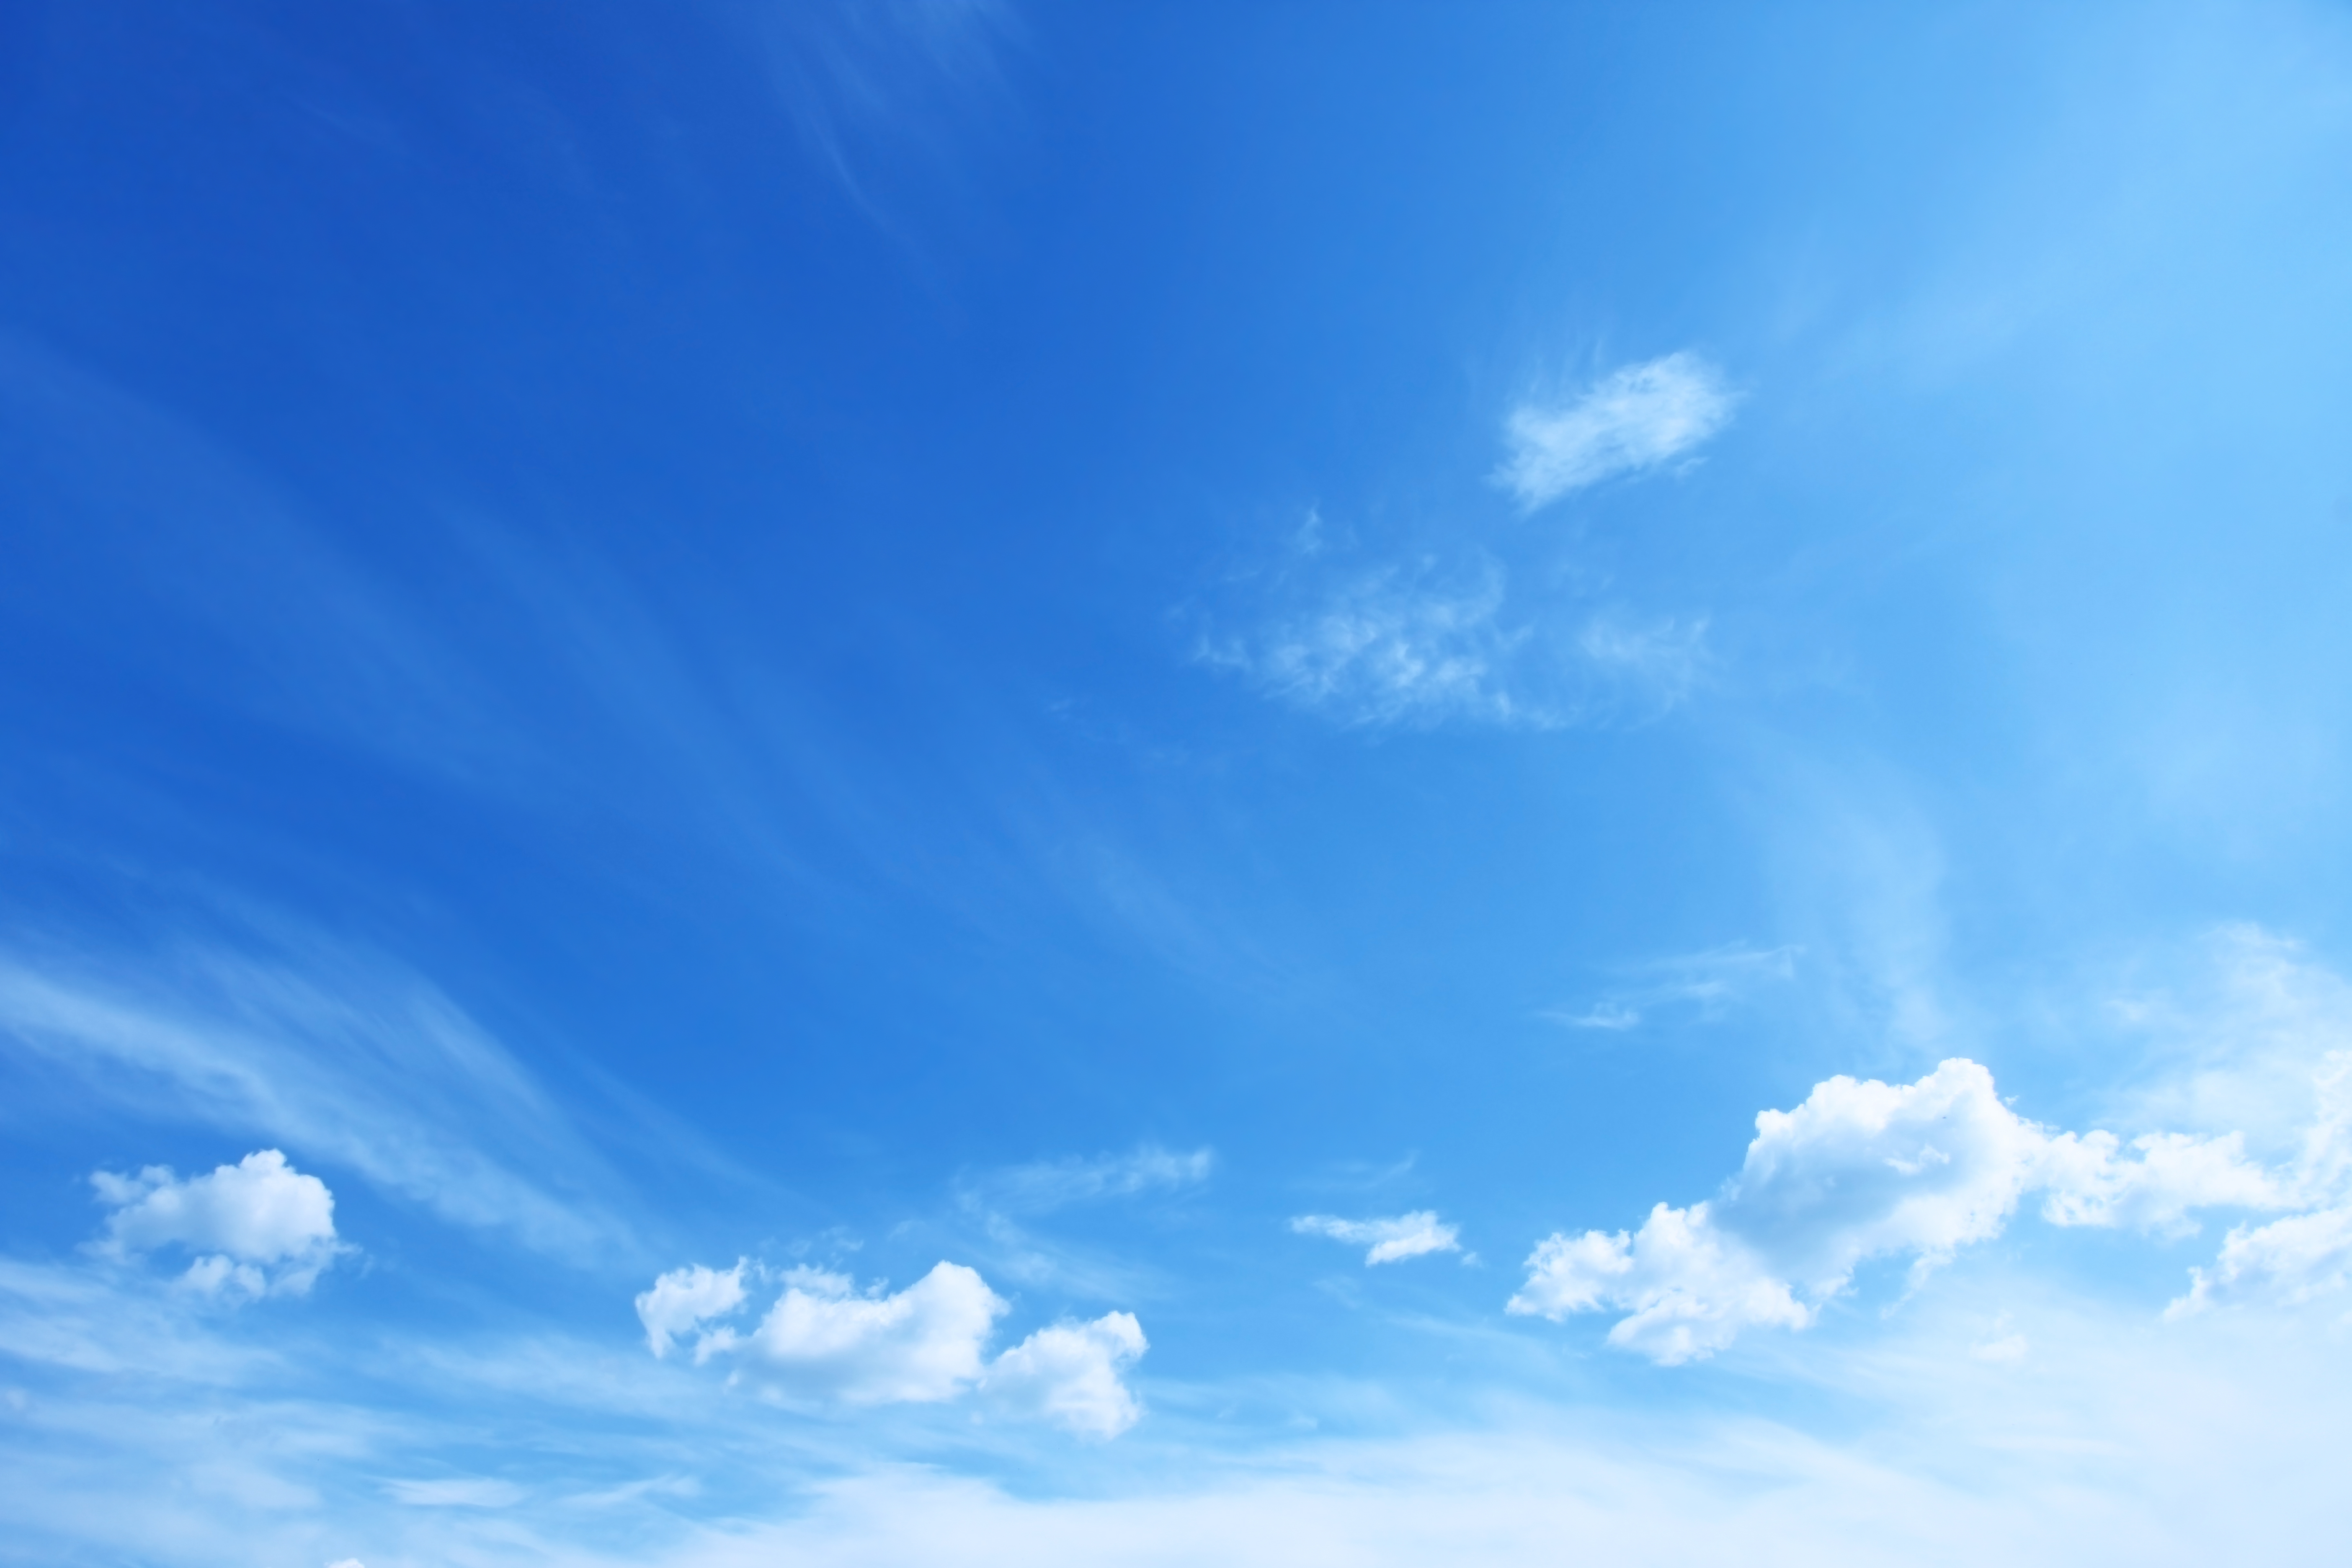 General 5616x3744 sky clouds nature outdoors minimalism simple background